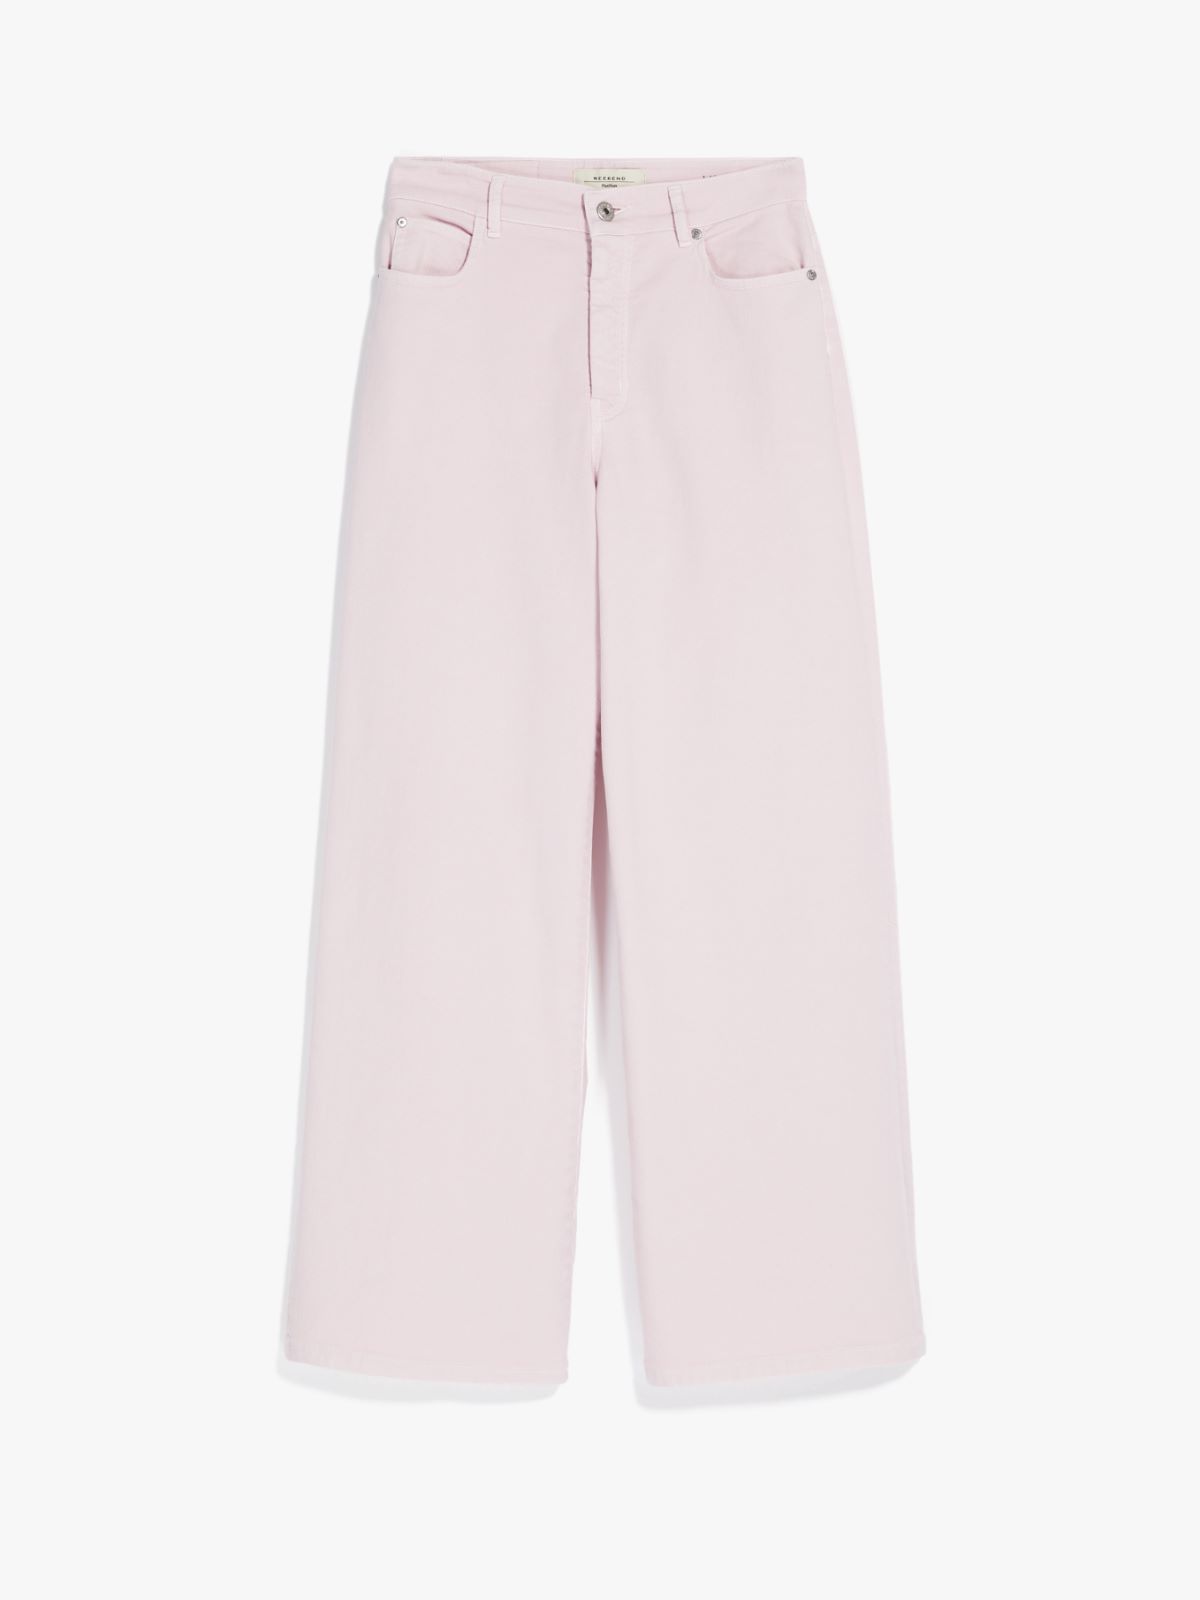 Stretch cotton trousers - PEONY - Weekend Max Mara - 5